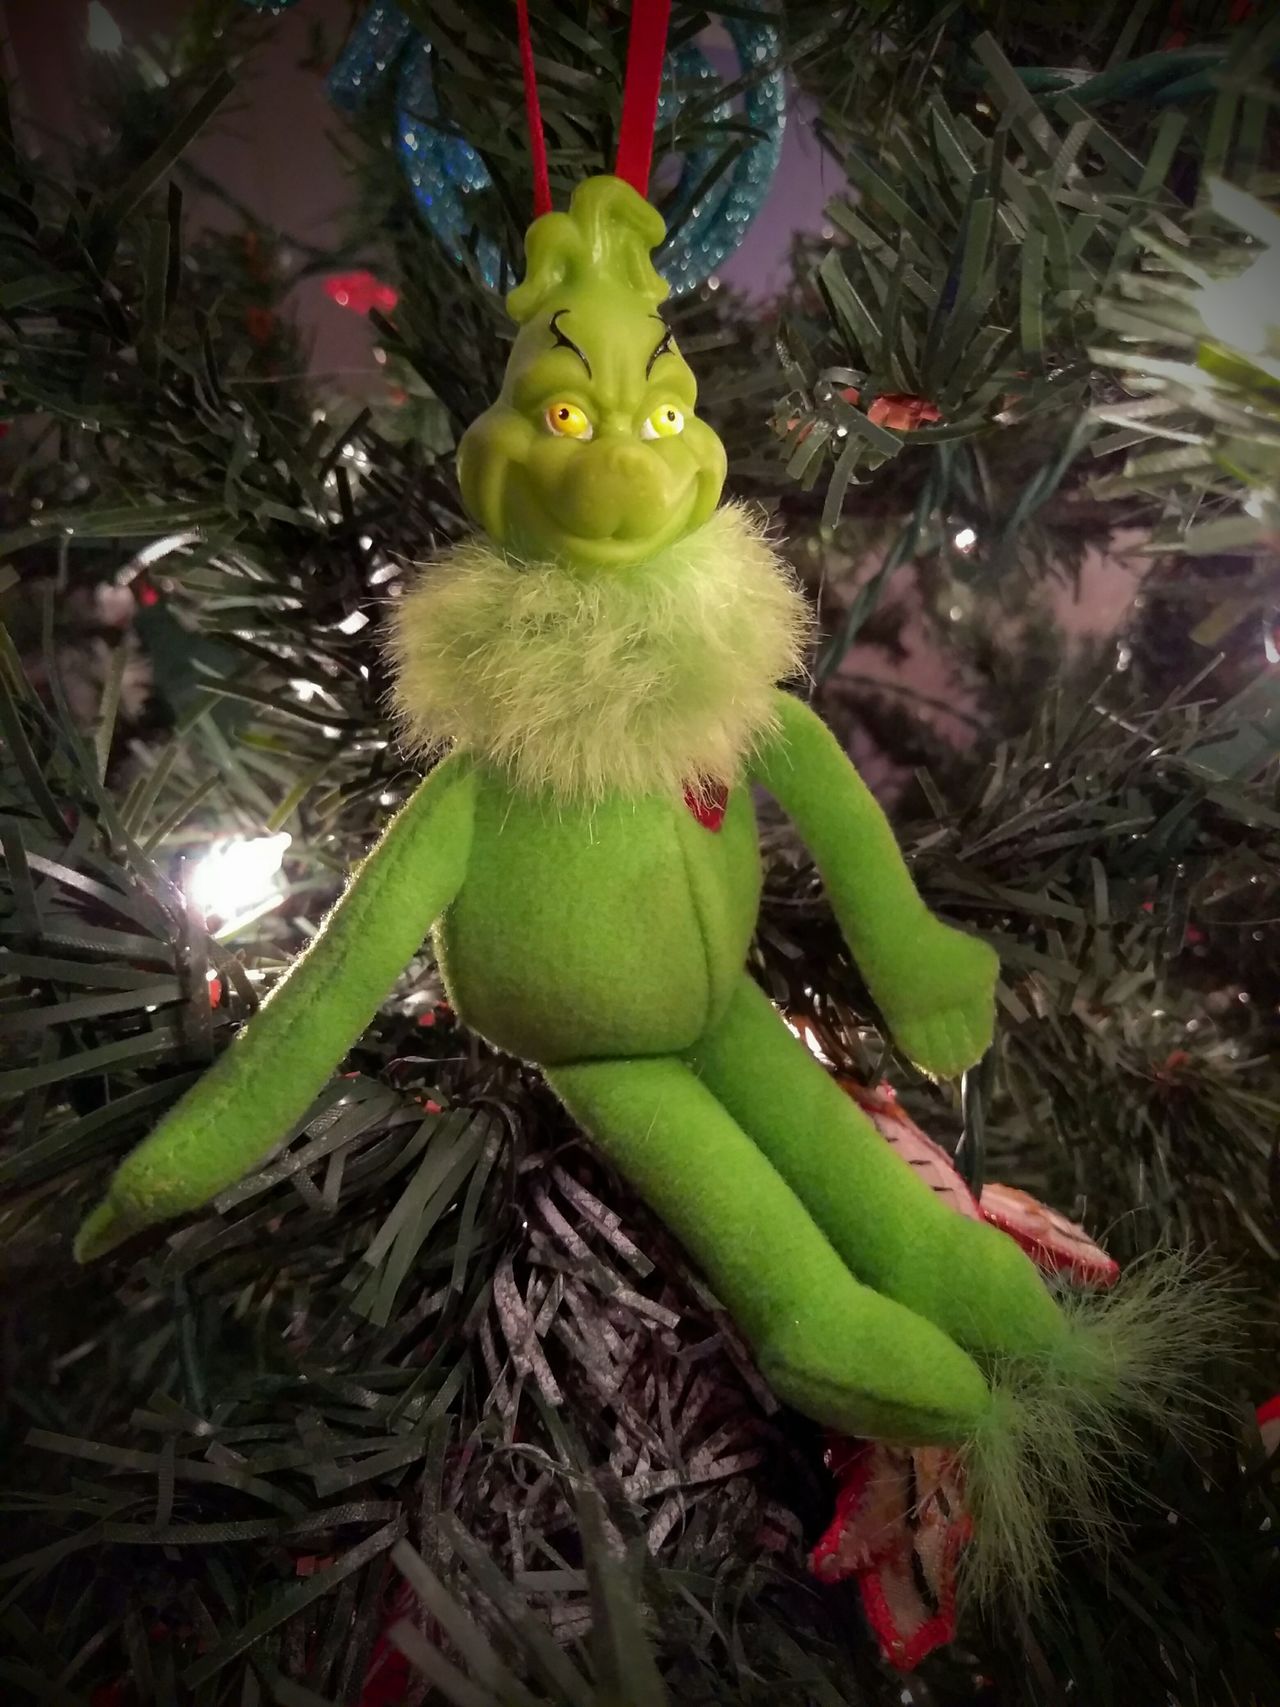 The green grinch